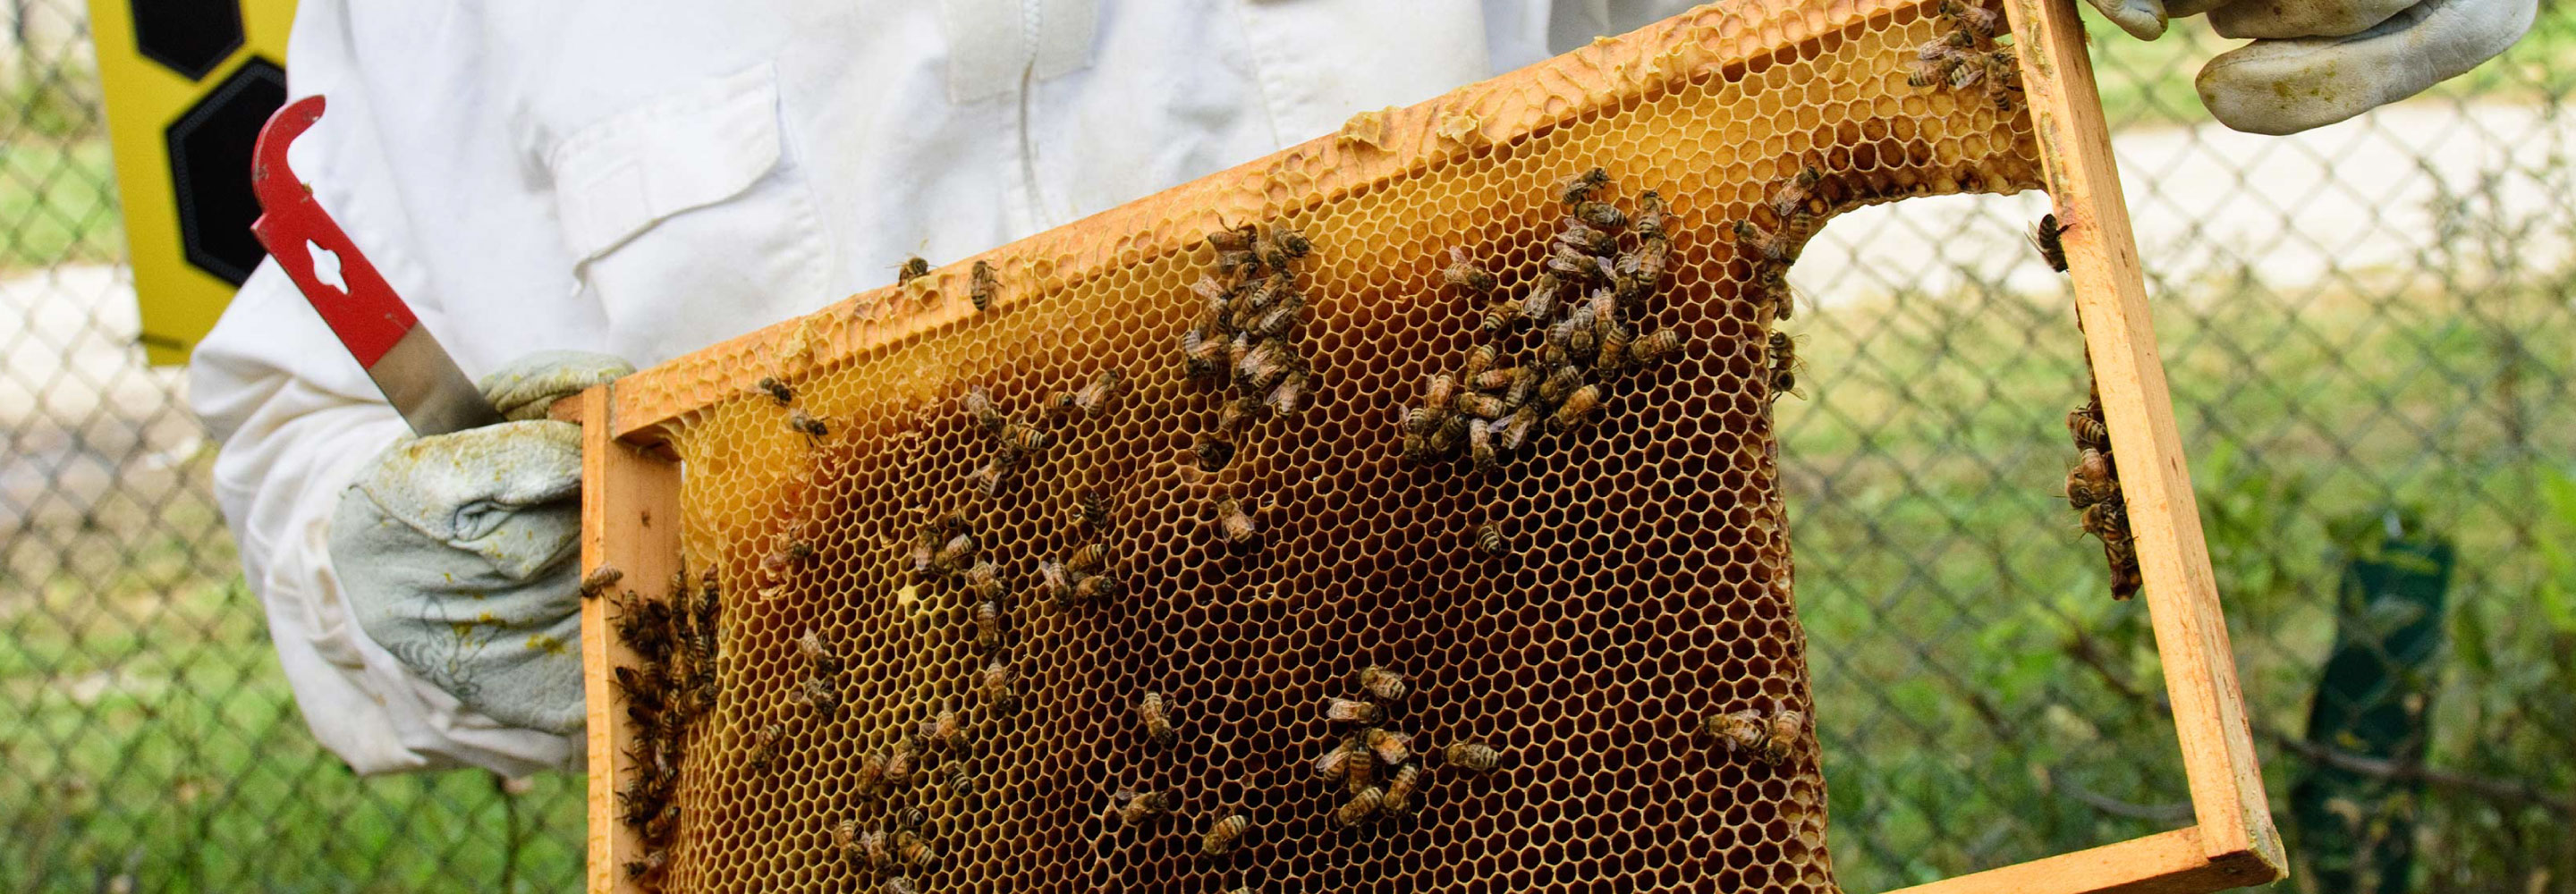 Honeycomb held by a Chicago urban bee farmer.